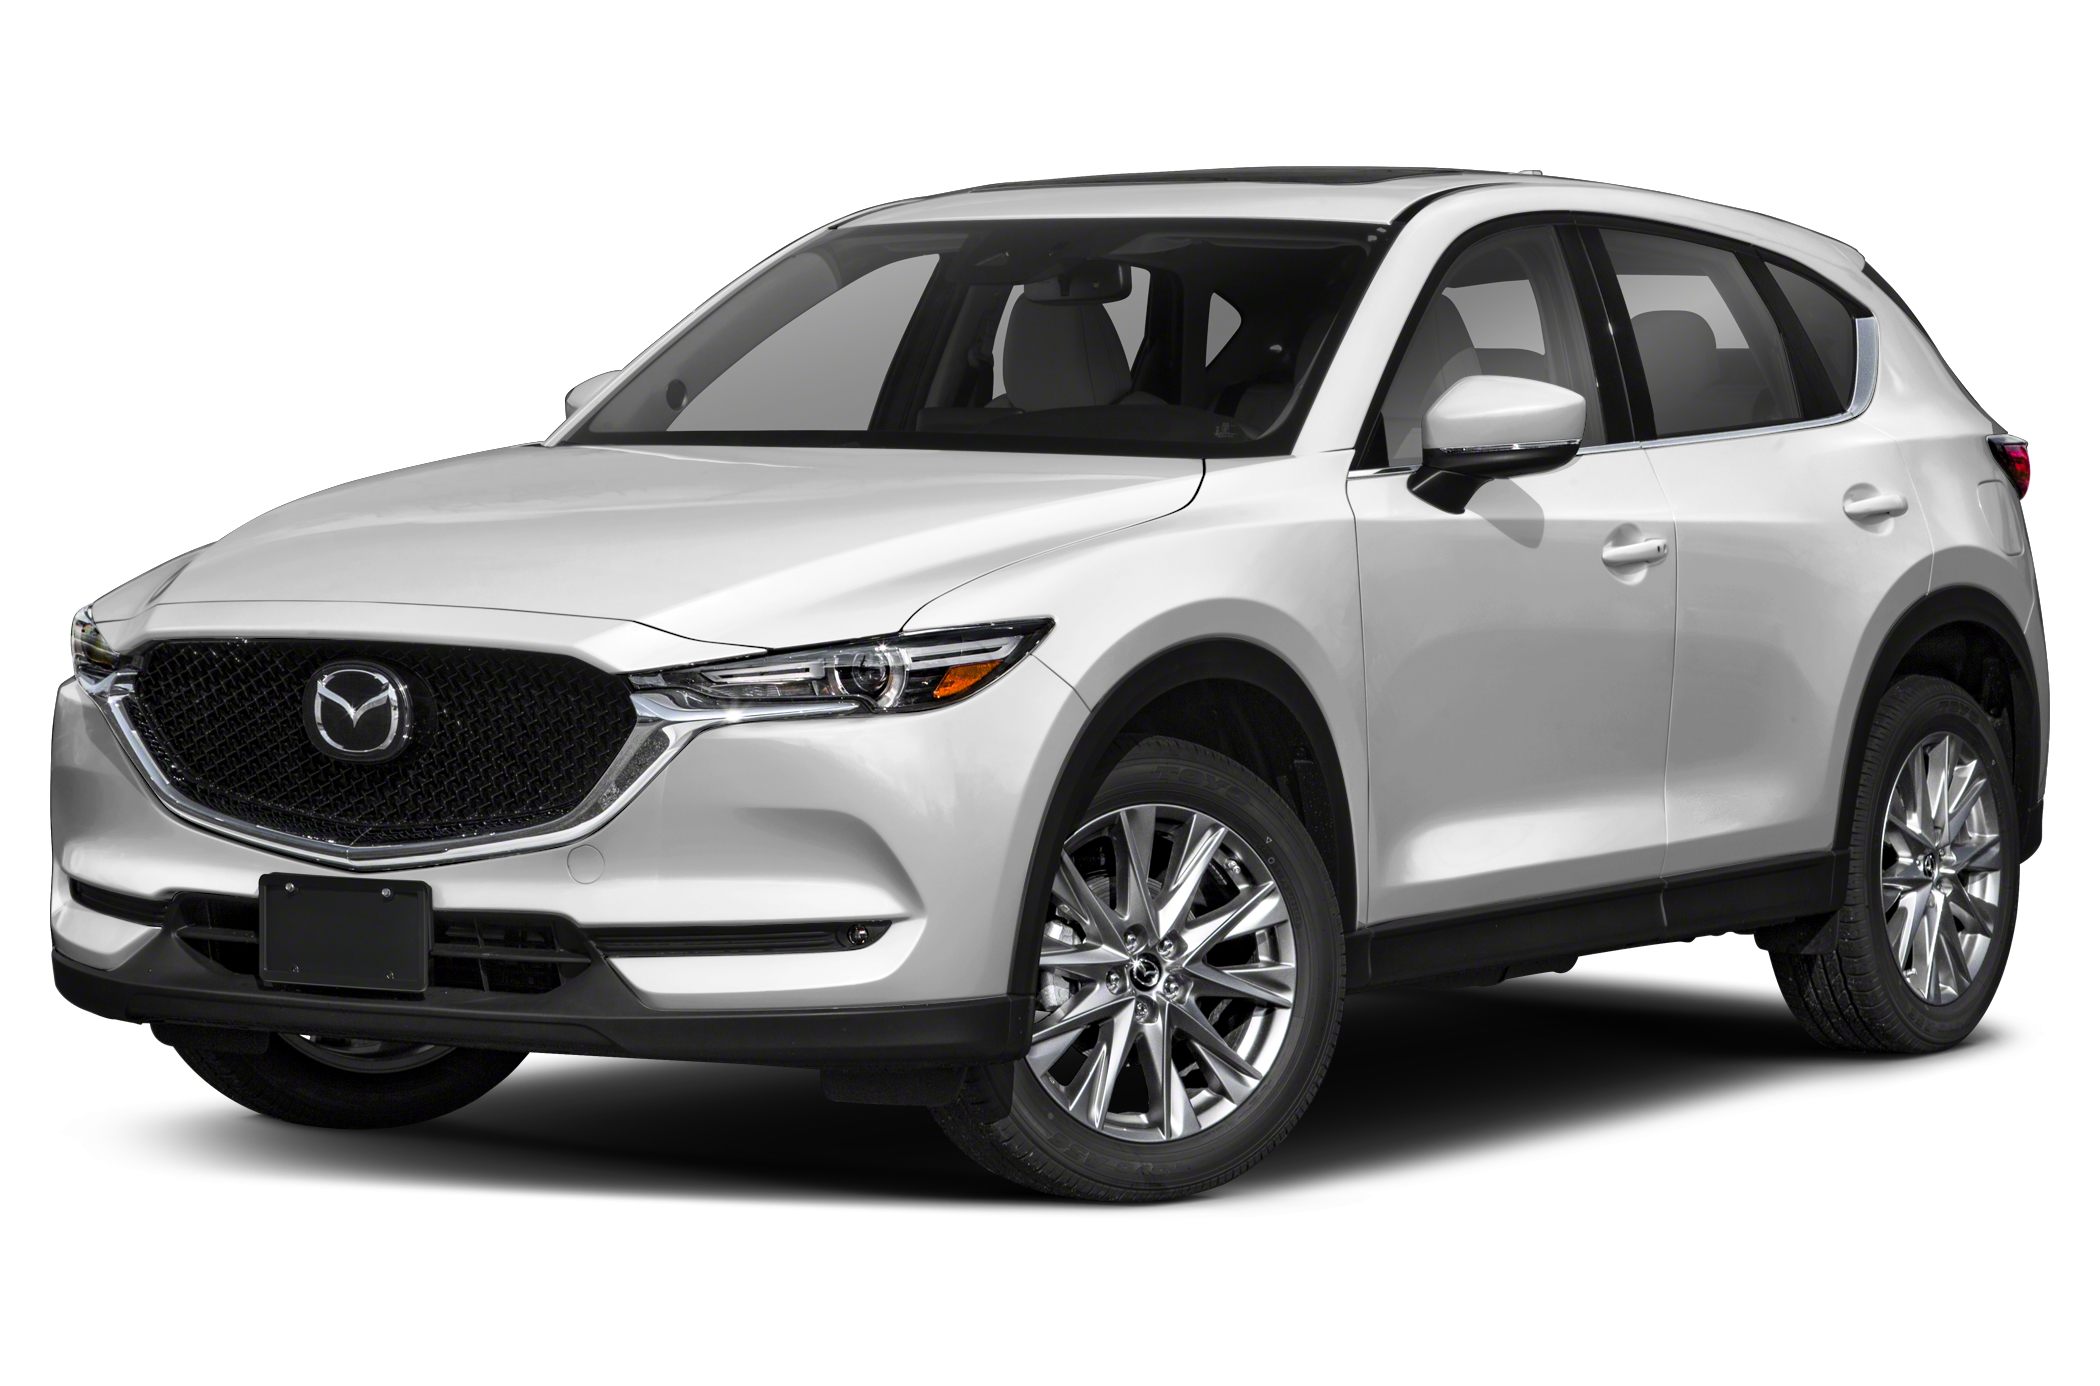 2019 Mazda Cx 5 Grand Touring 4dr Front Wheel Drive Sport Utility Pictures